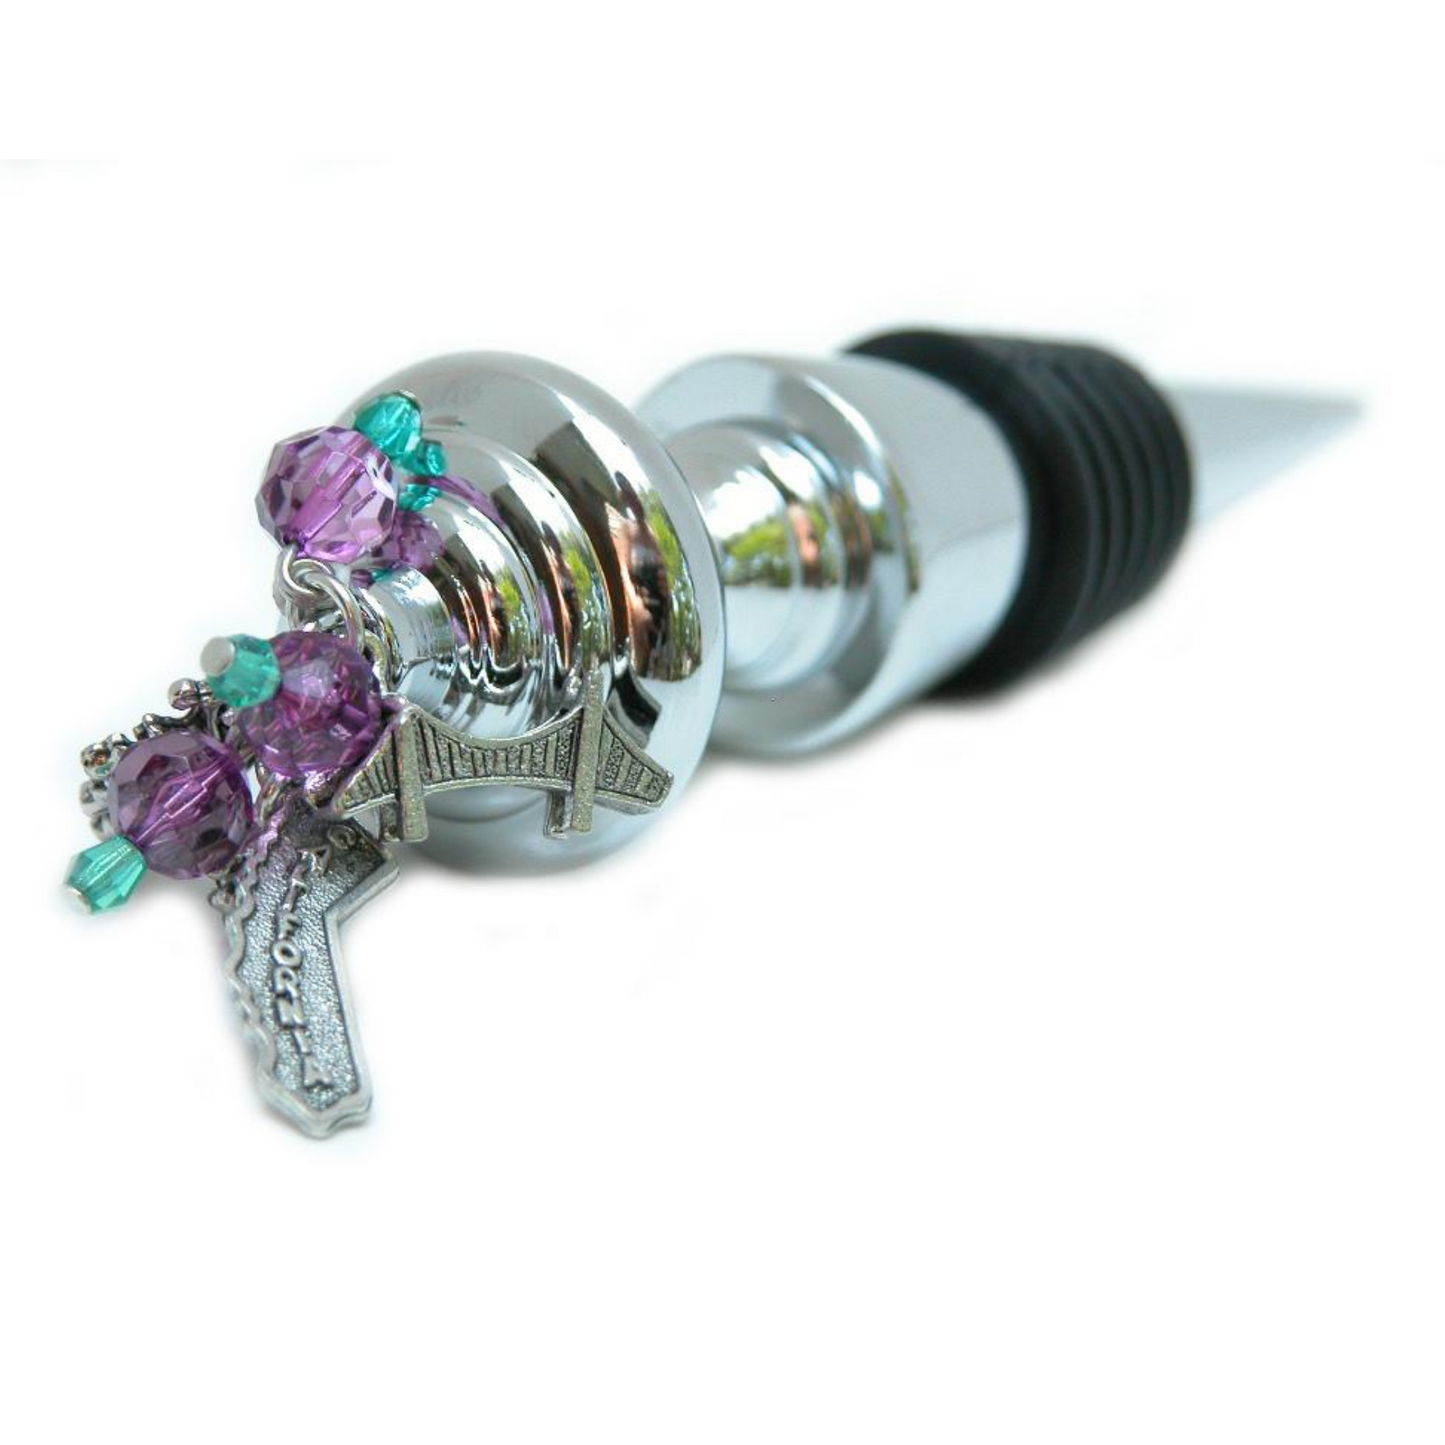 Bottle Stopper, State of California, Charms and Beads, Handmade, Birthday Gift